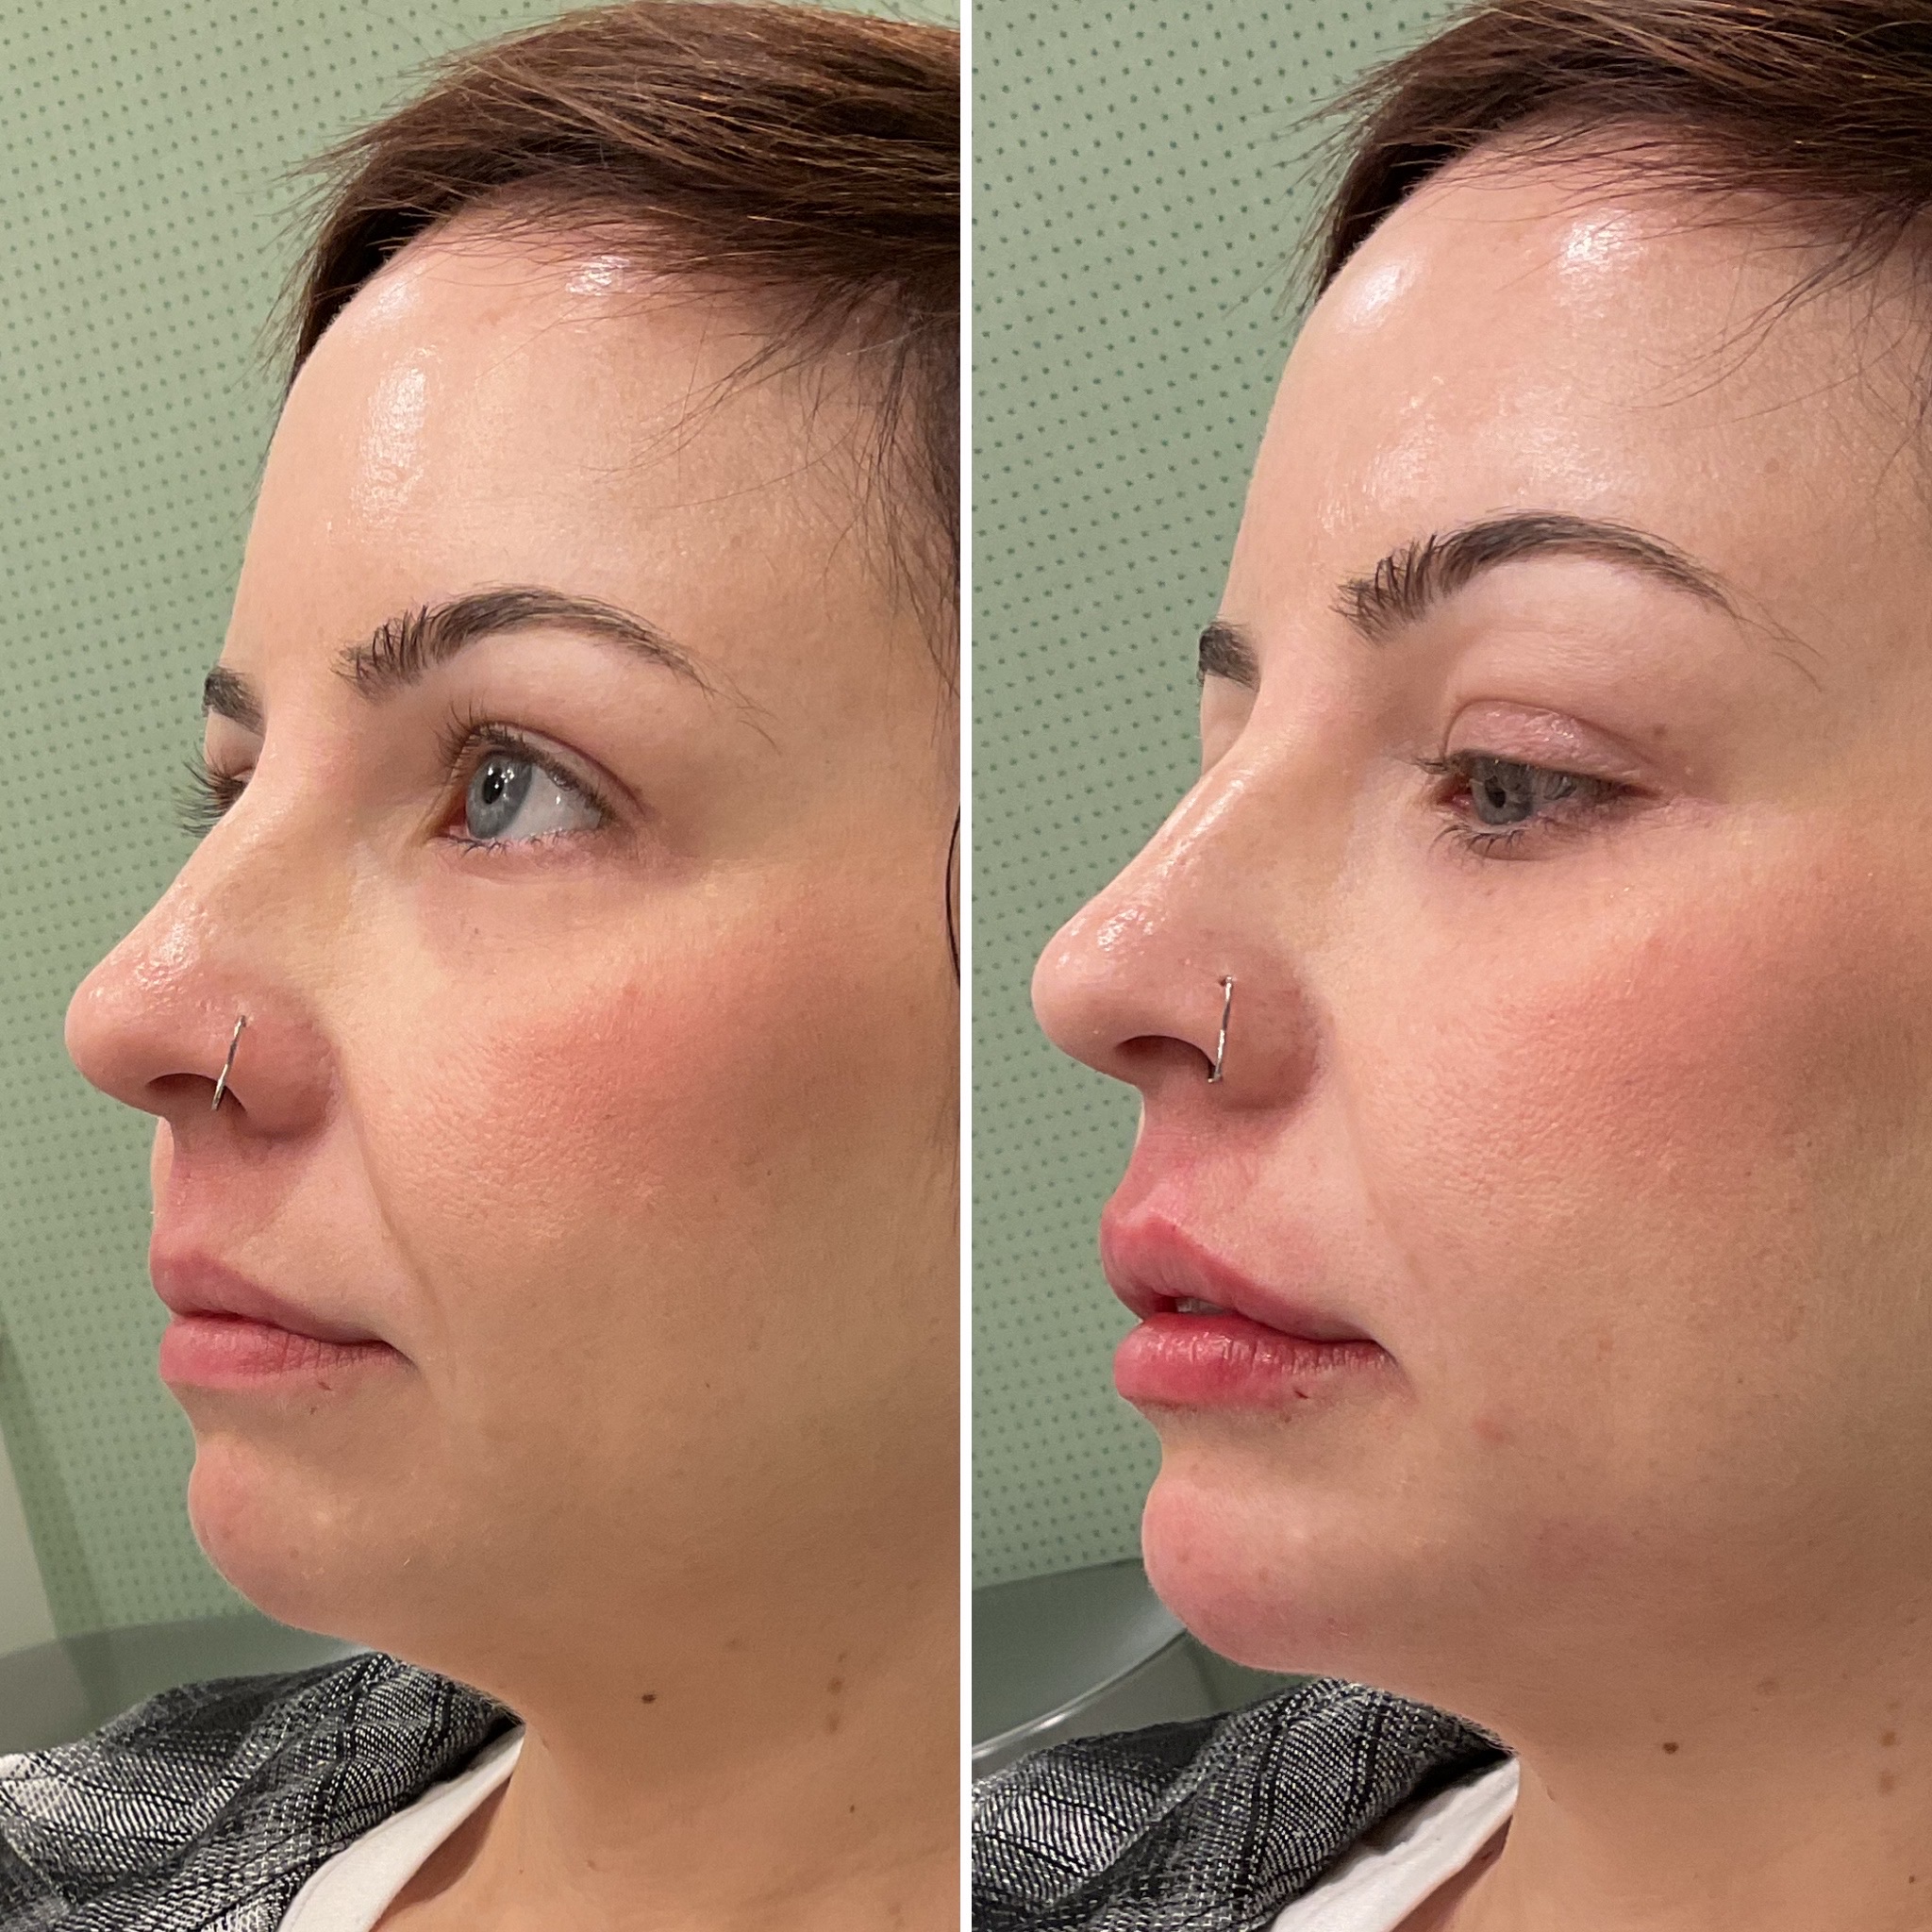 Lip filler & chin enhancement before and after